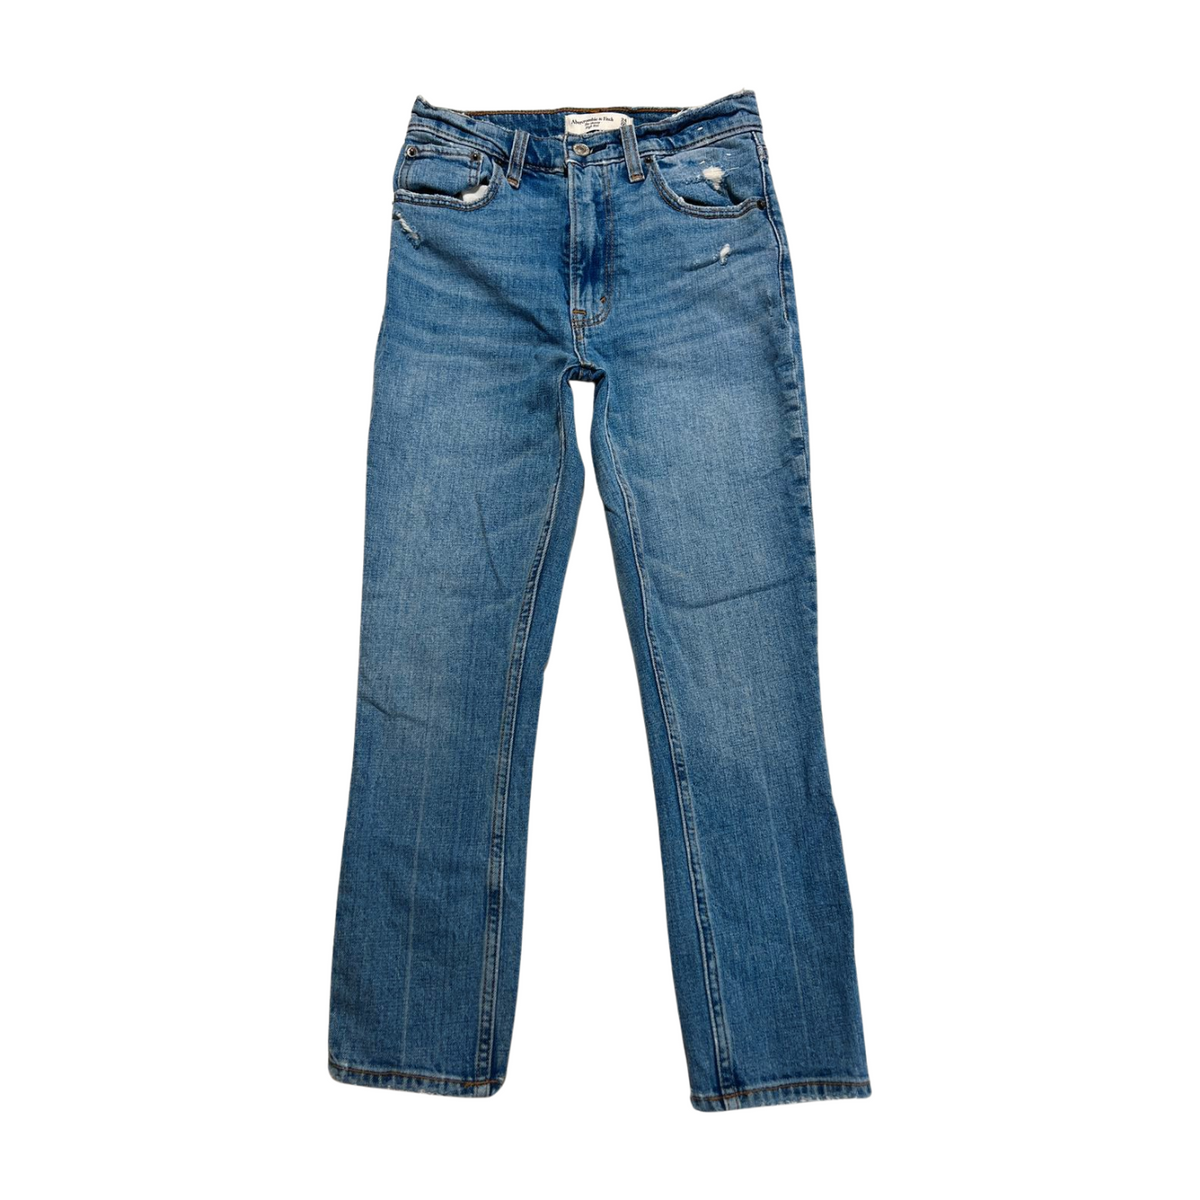 Abercrombie & Fitch- "The Skinny" Distressed Jeans